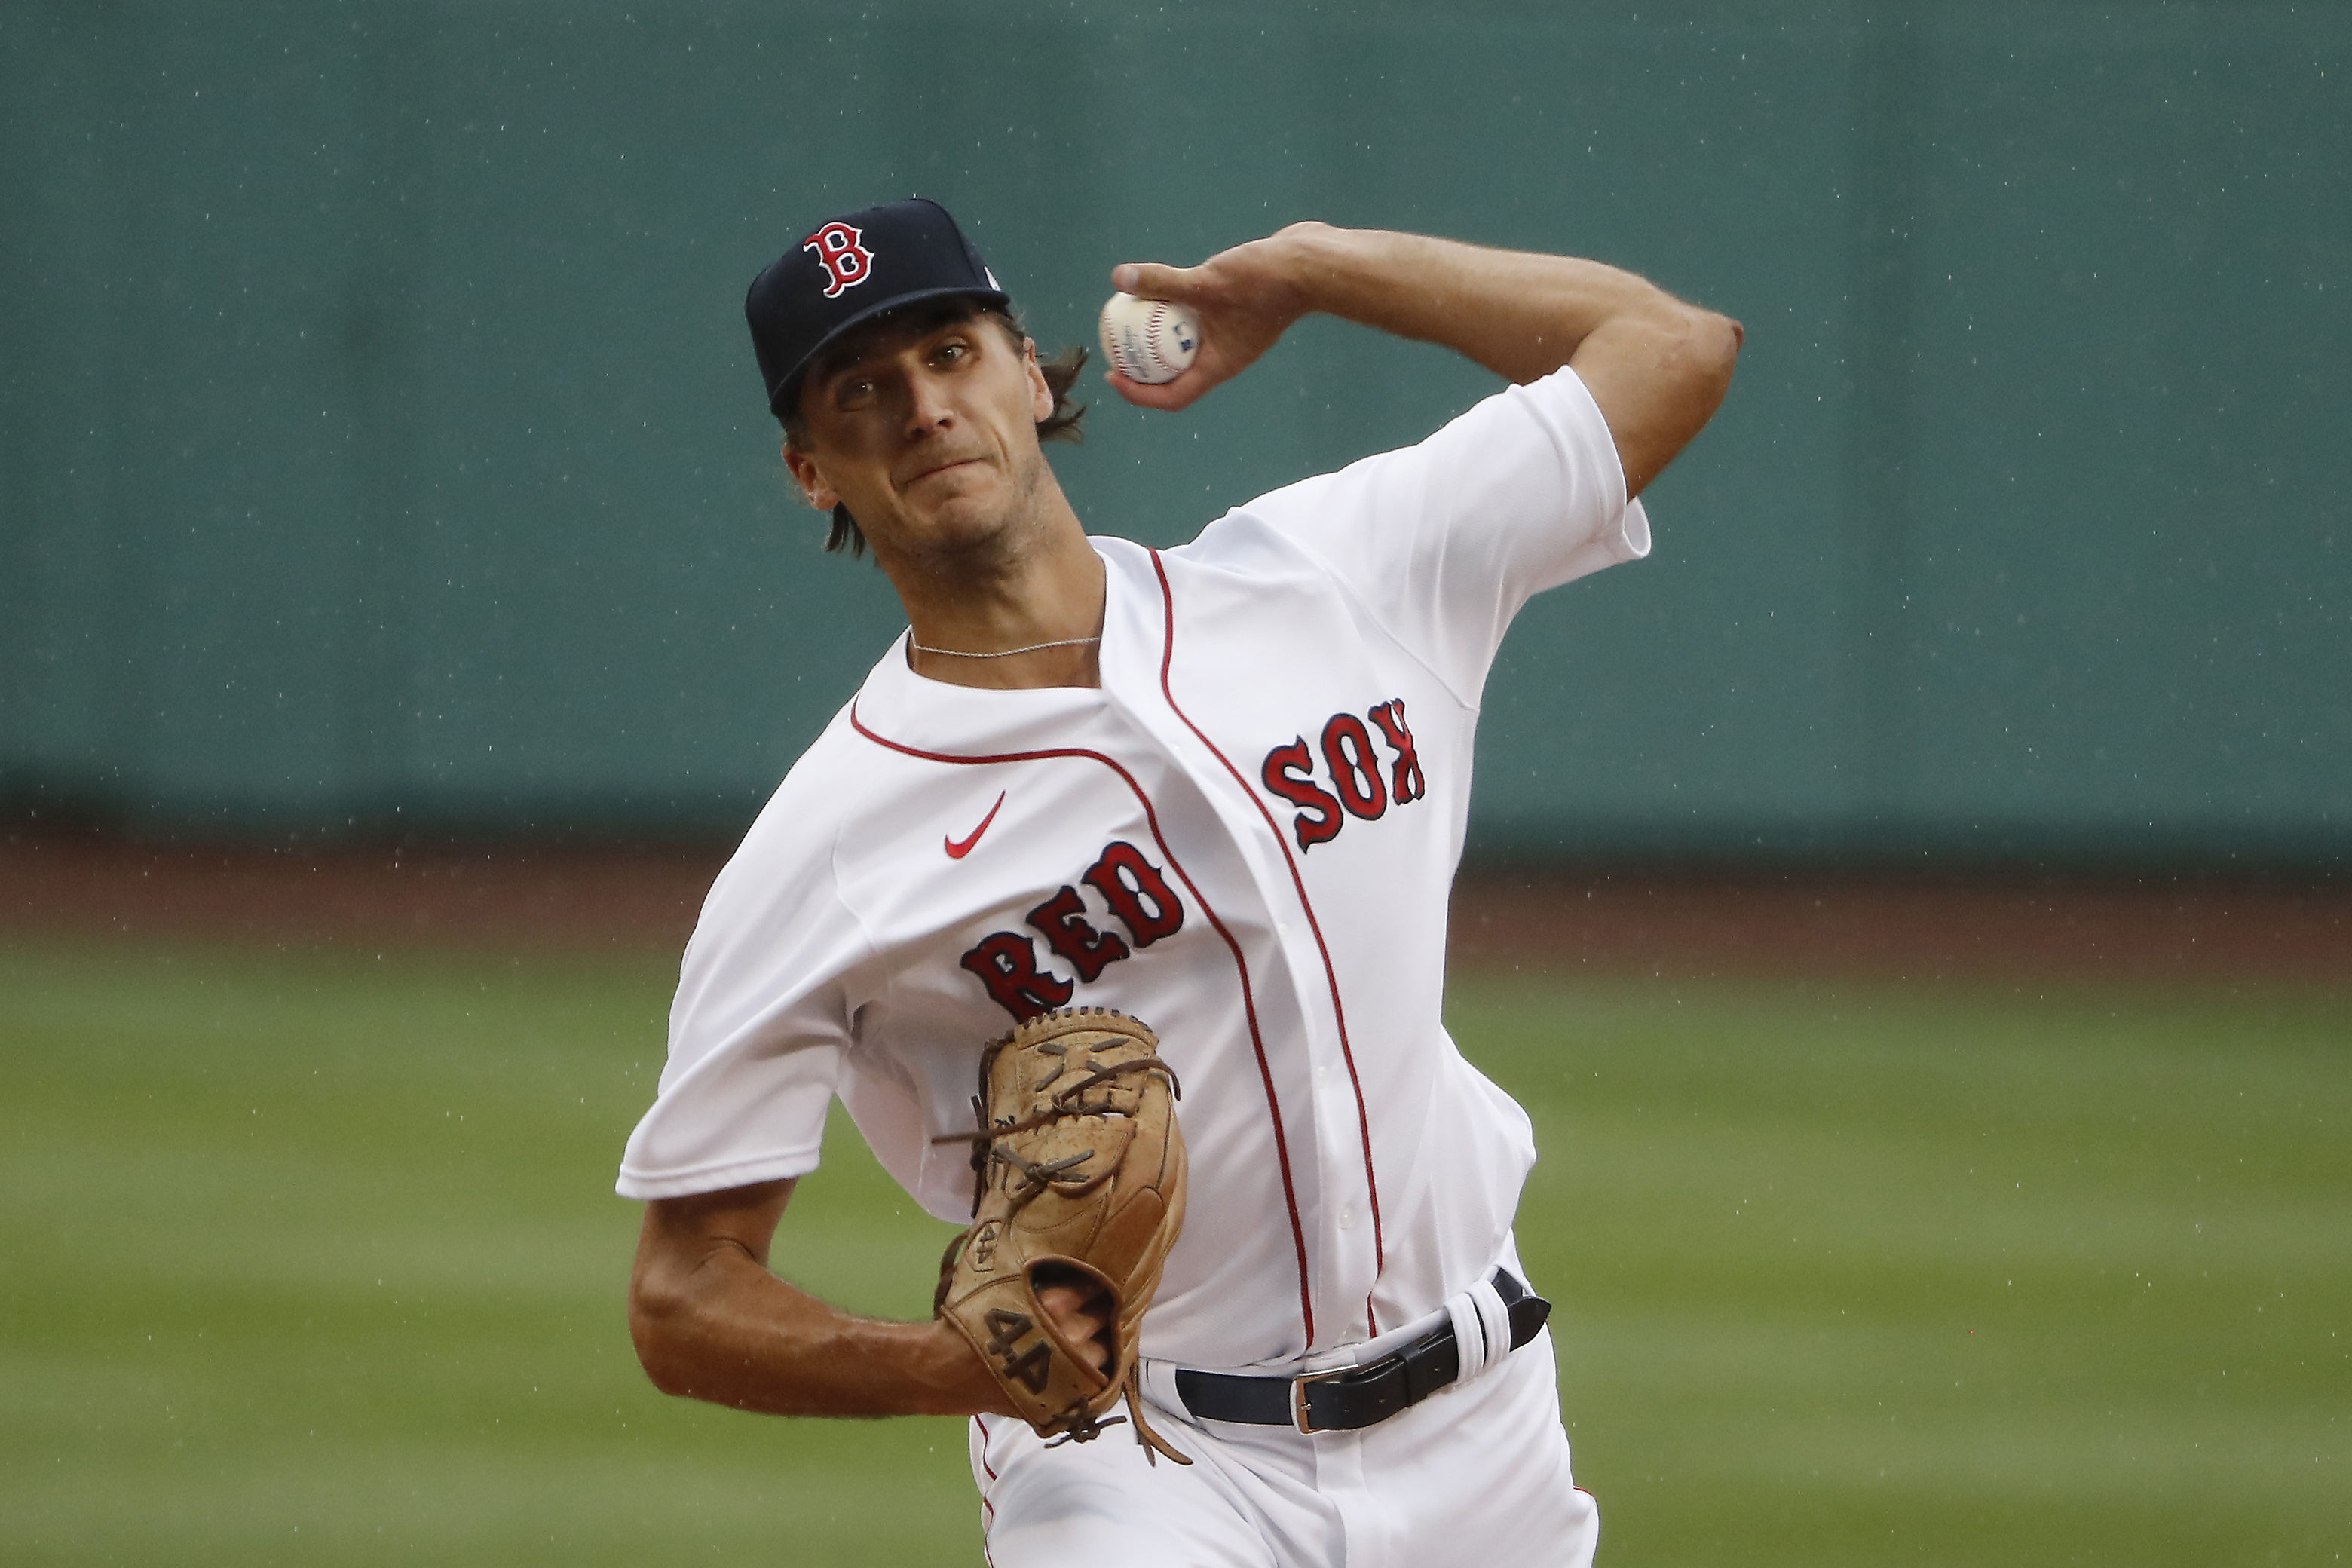 Red Sox Make Decision on Relief Pitcher After Scary Injury Moment